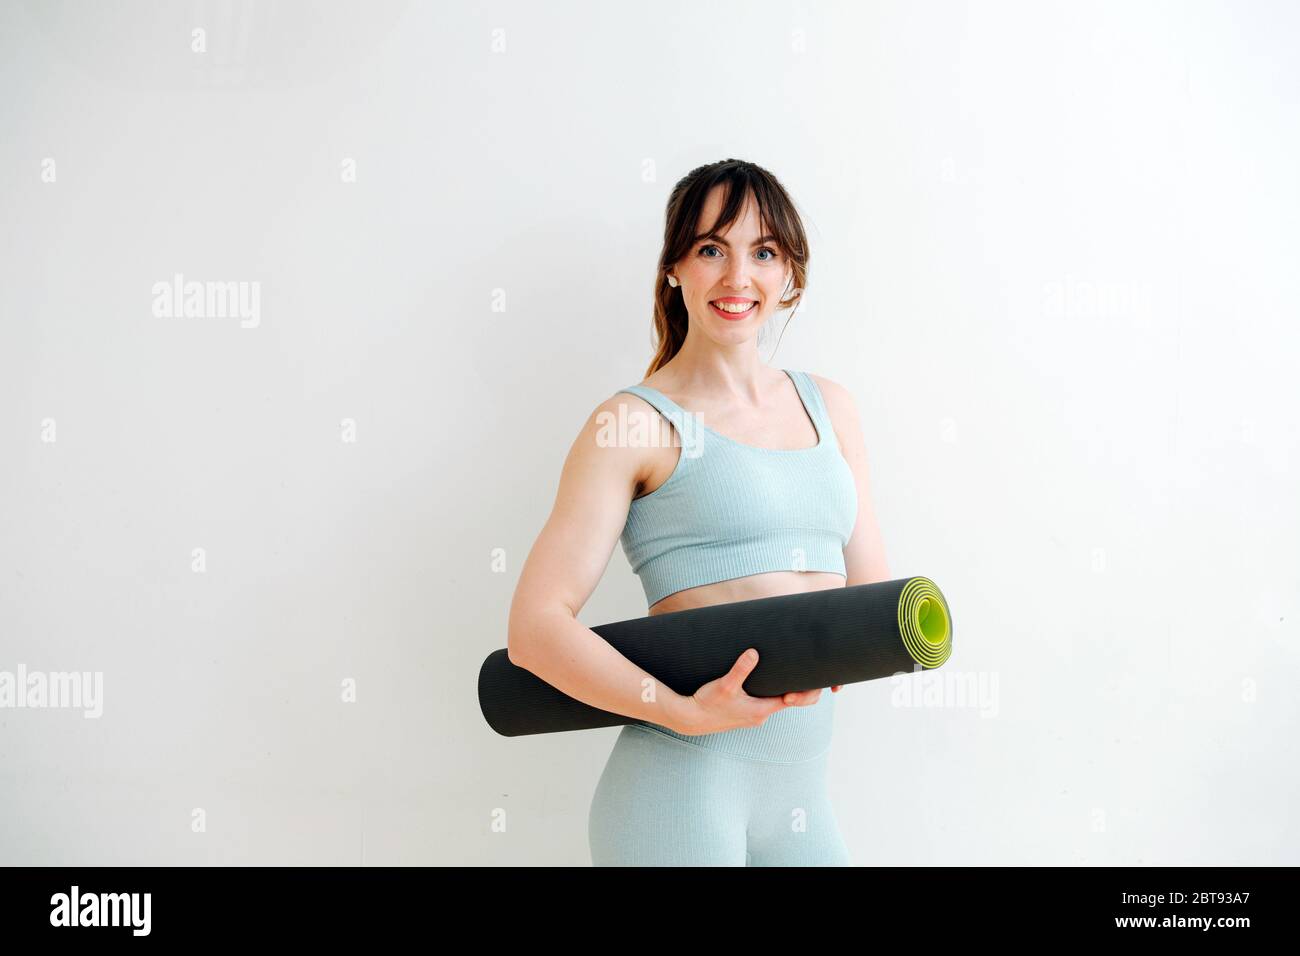 Getting ready for workout. Skinny girl in a sweatsuit holding a rolled-up mat Stock Photo